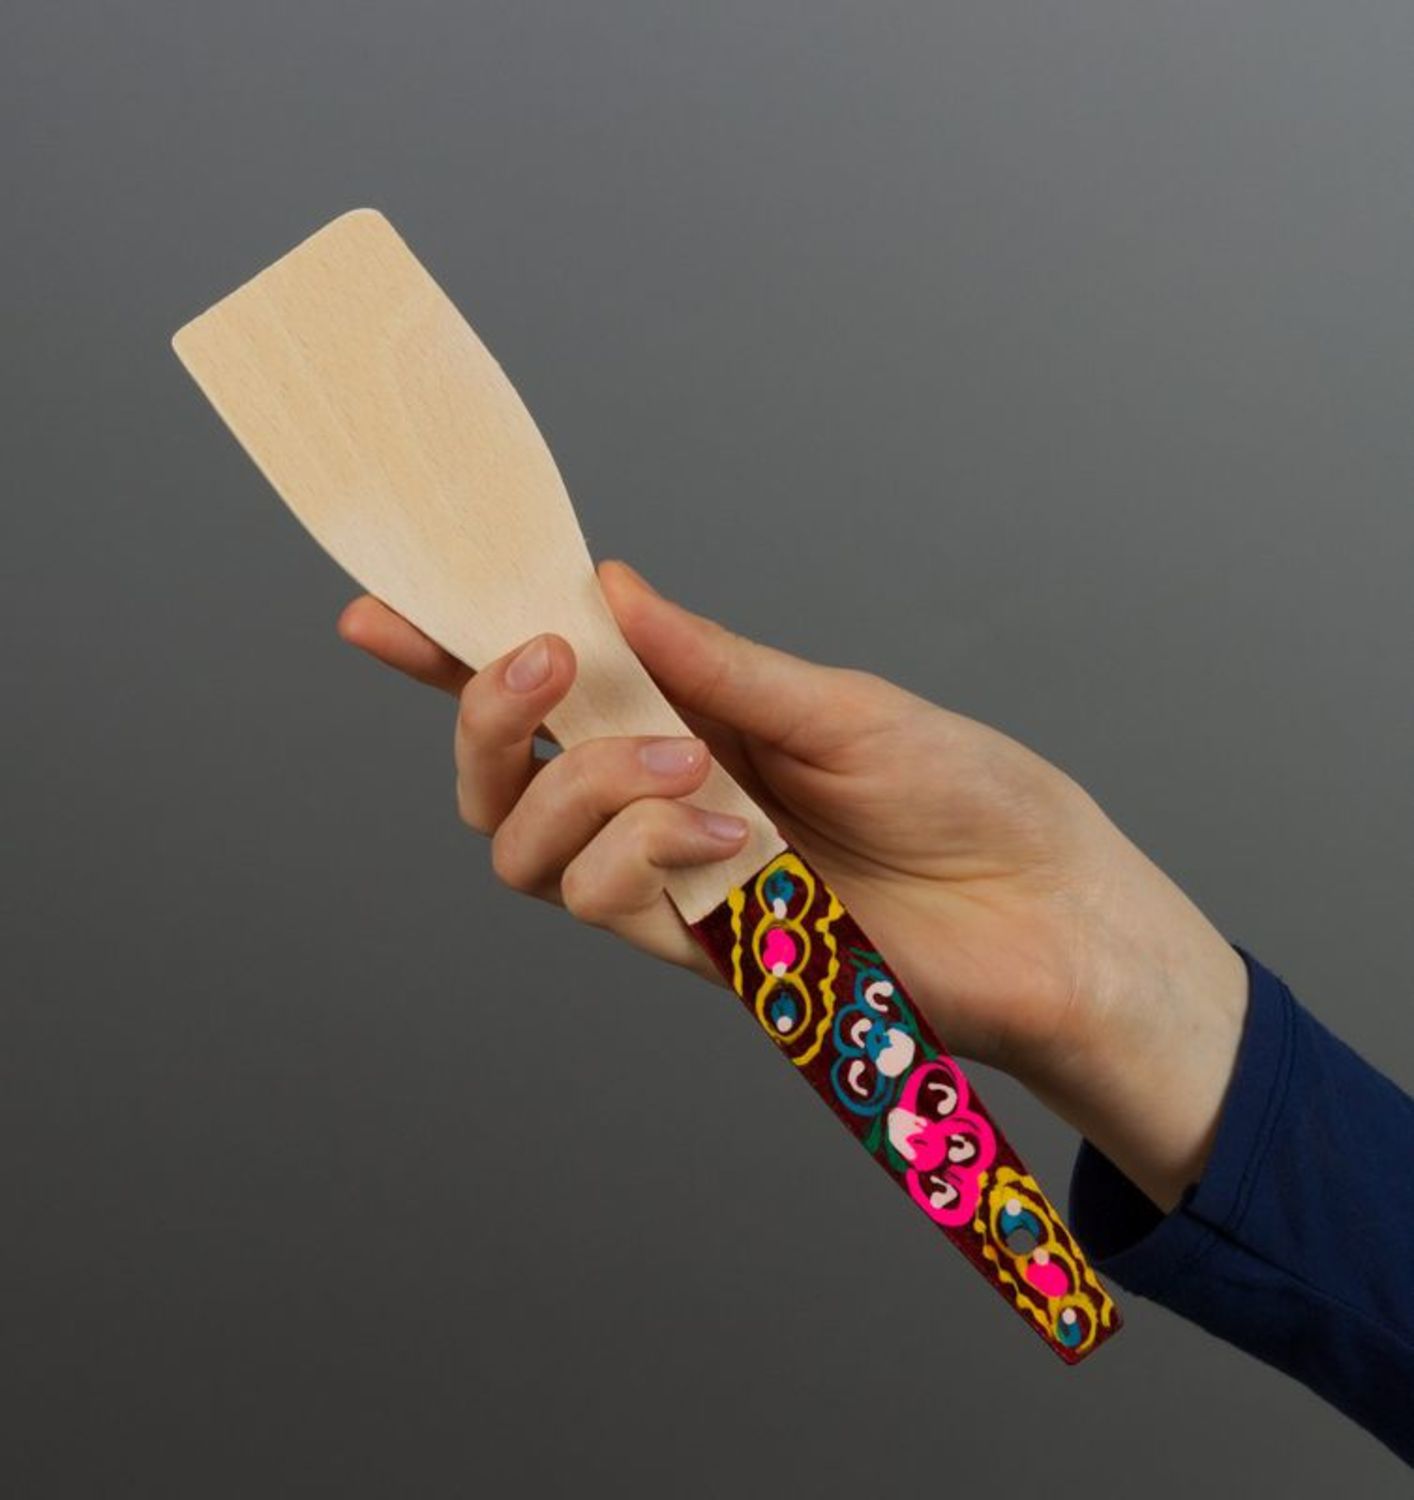 Wooden spatula with painting photo 2